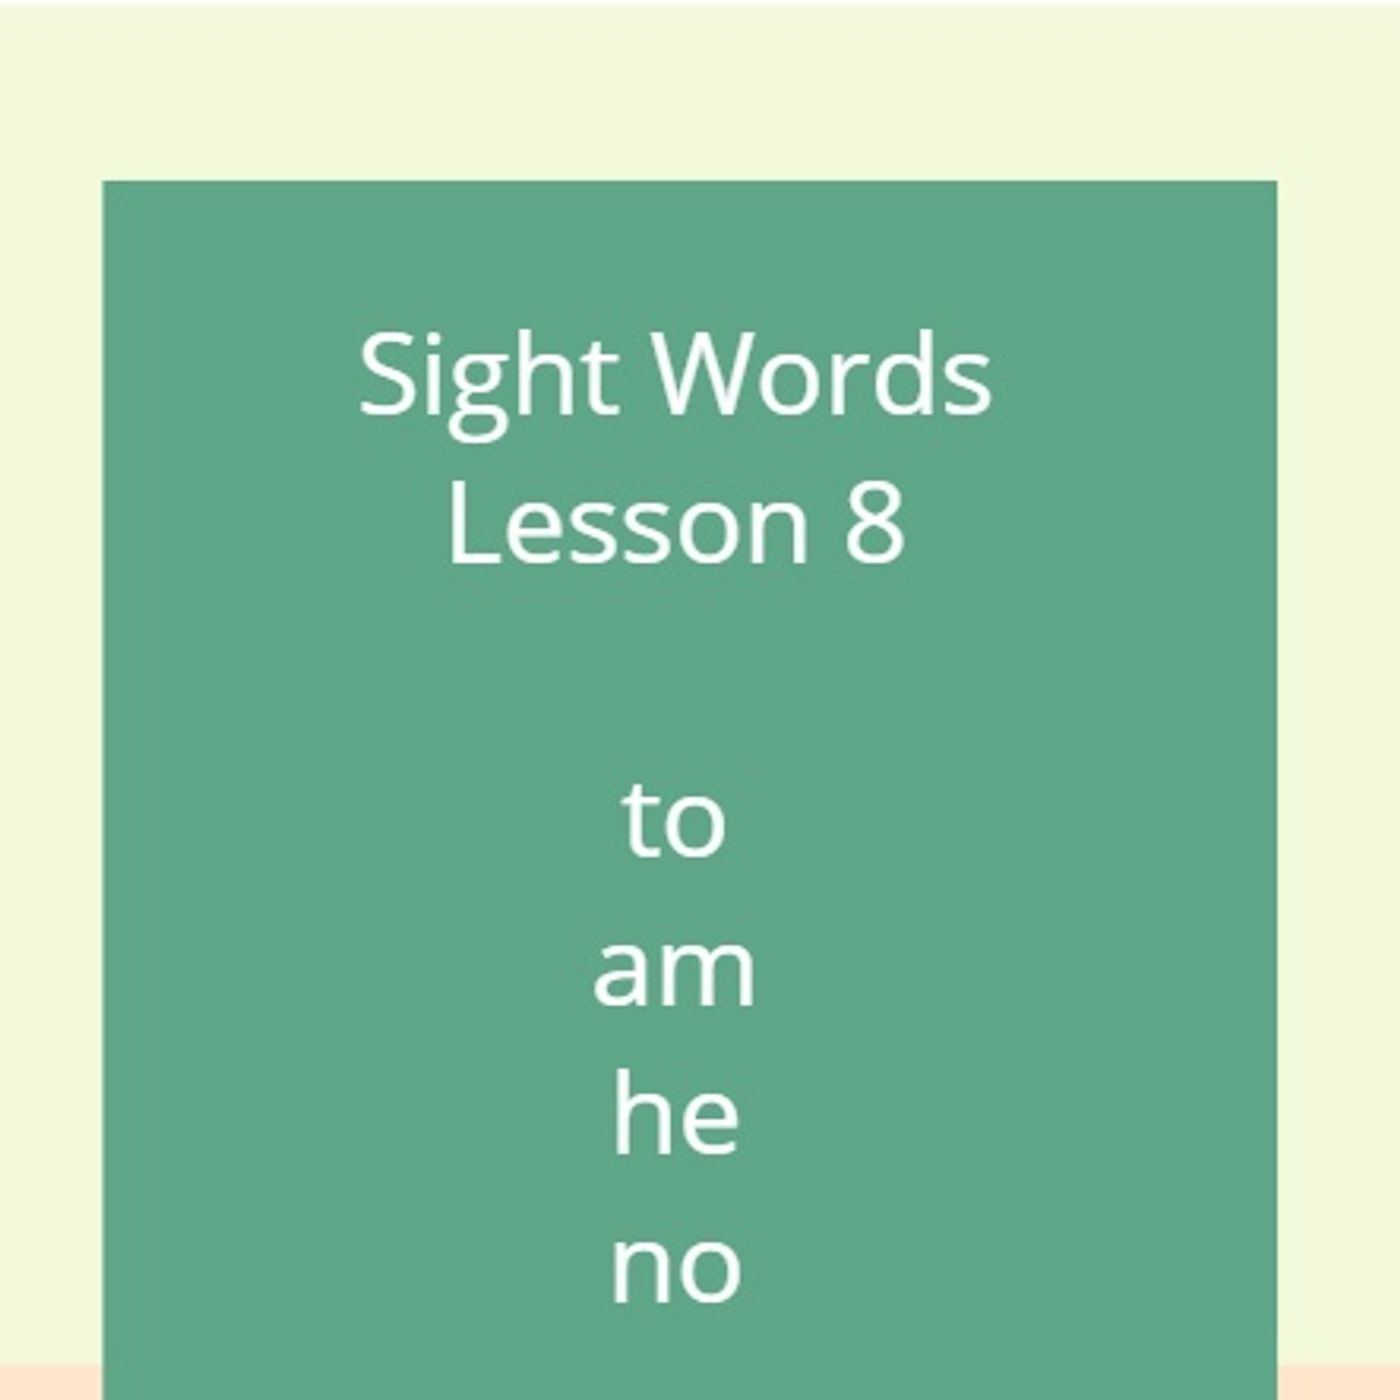 Sight Words Lesson 8